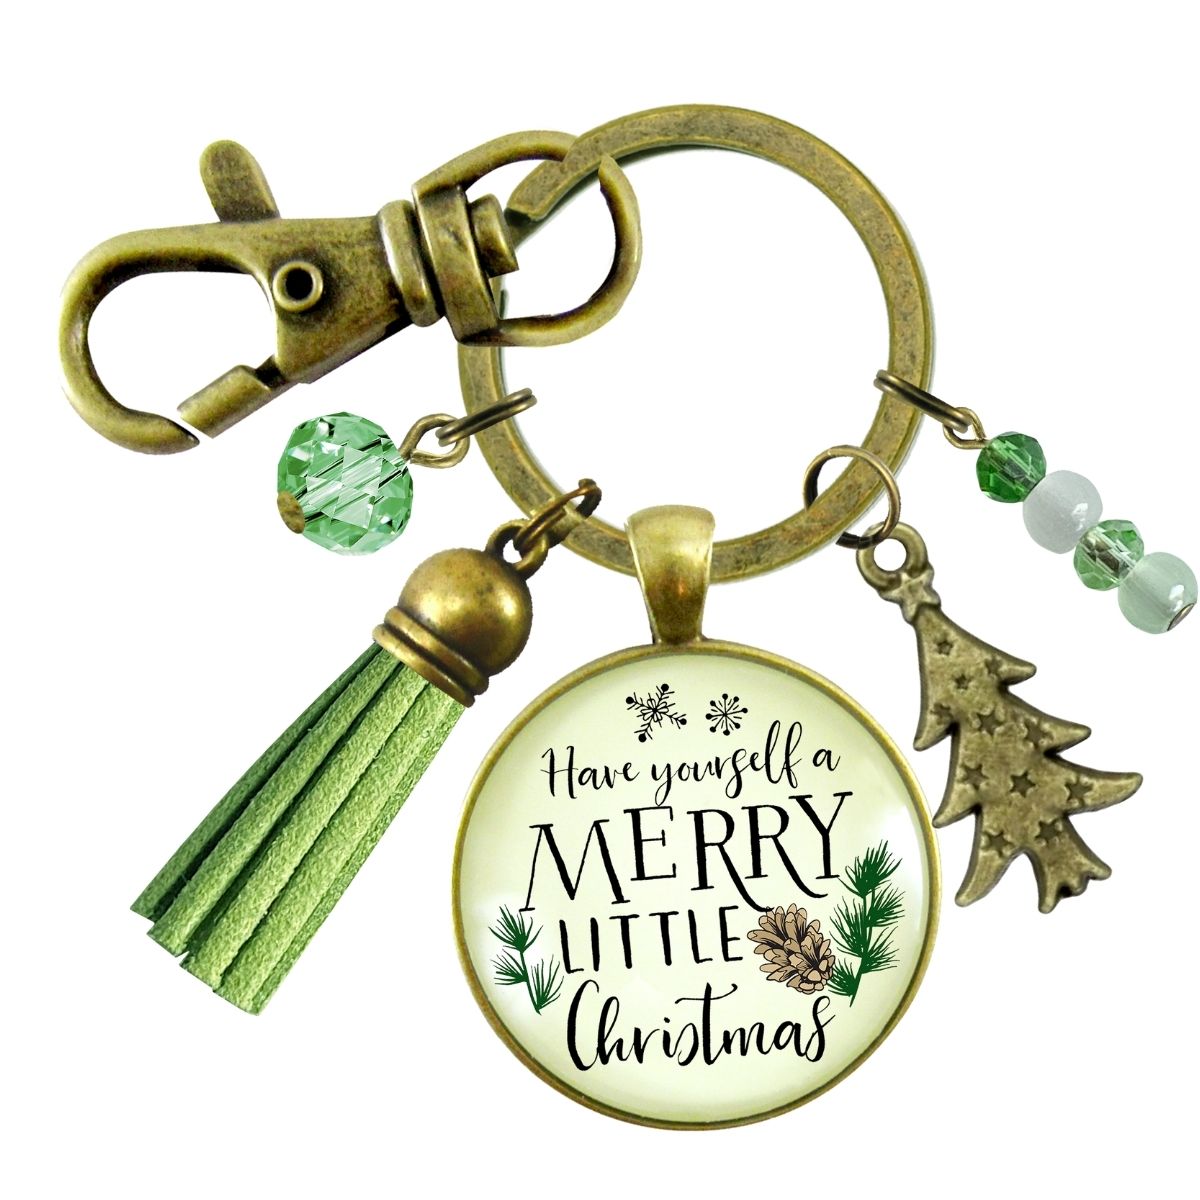 Christmas Pendant Have Yourself a Merry Little Christmas Keychain Handmade Holiday Jewelry Pine Cone Charm   - Gutsy Goodness Handmade Jewelry